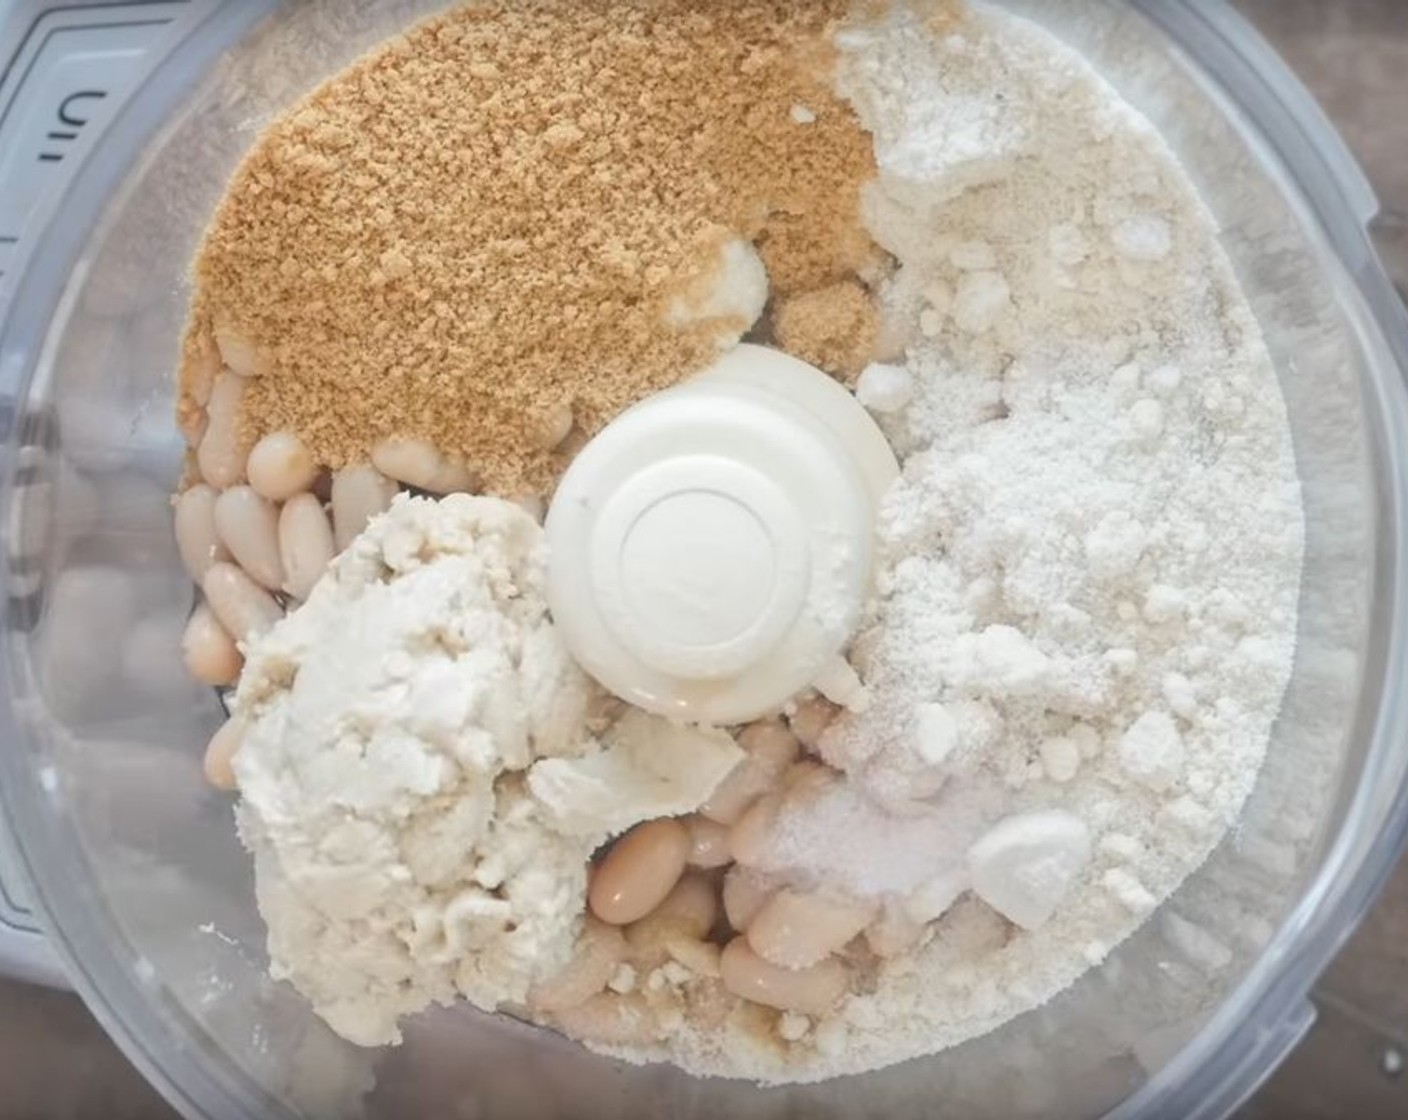 step 1 To a food processor add White Beans (1 can), Cashew Butter (1/2 cup), Almond Flour (3/4 cup), Maple Syrup (1/4 cup), Vanilla Extract (1 Tbsp), and Sea Salt (1/2 tsp).